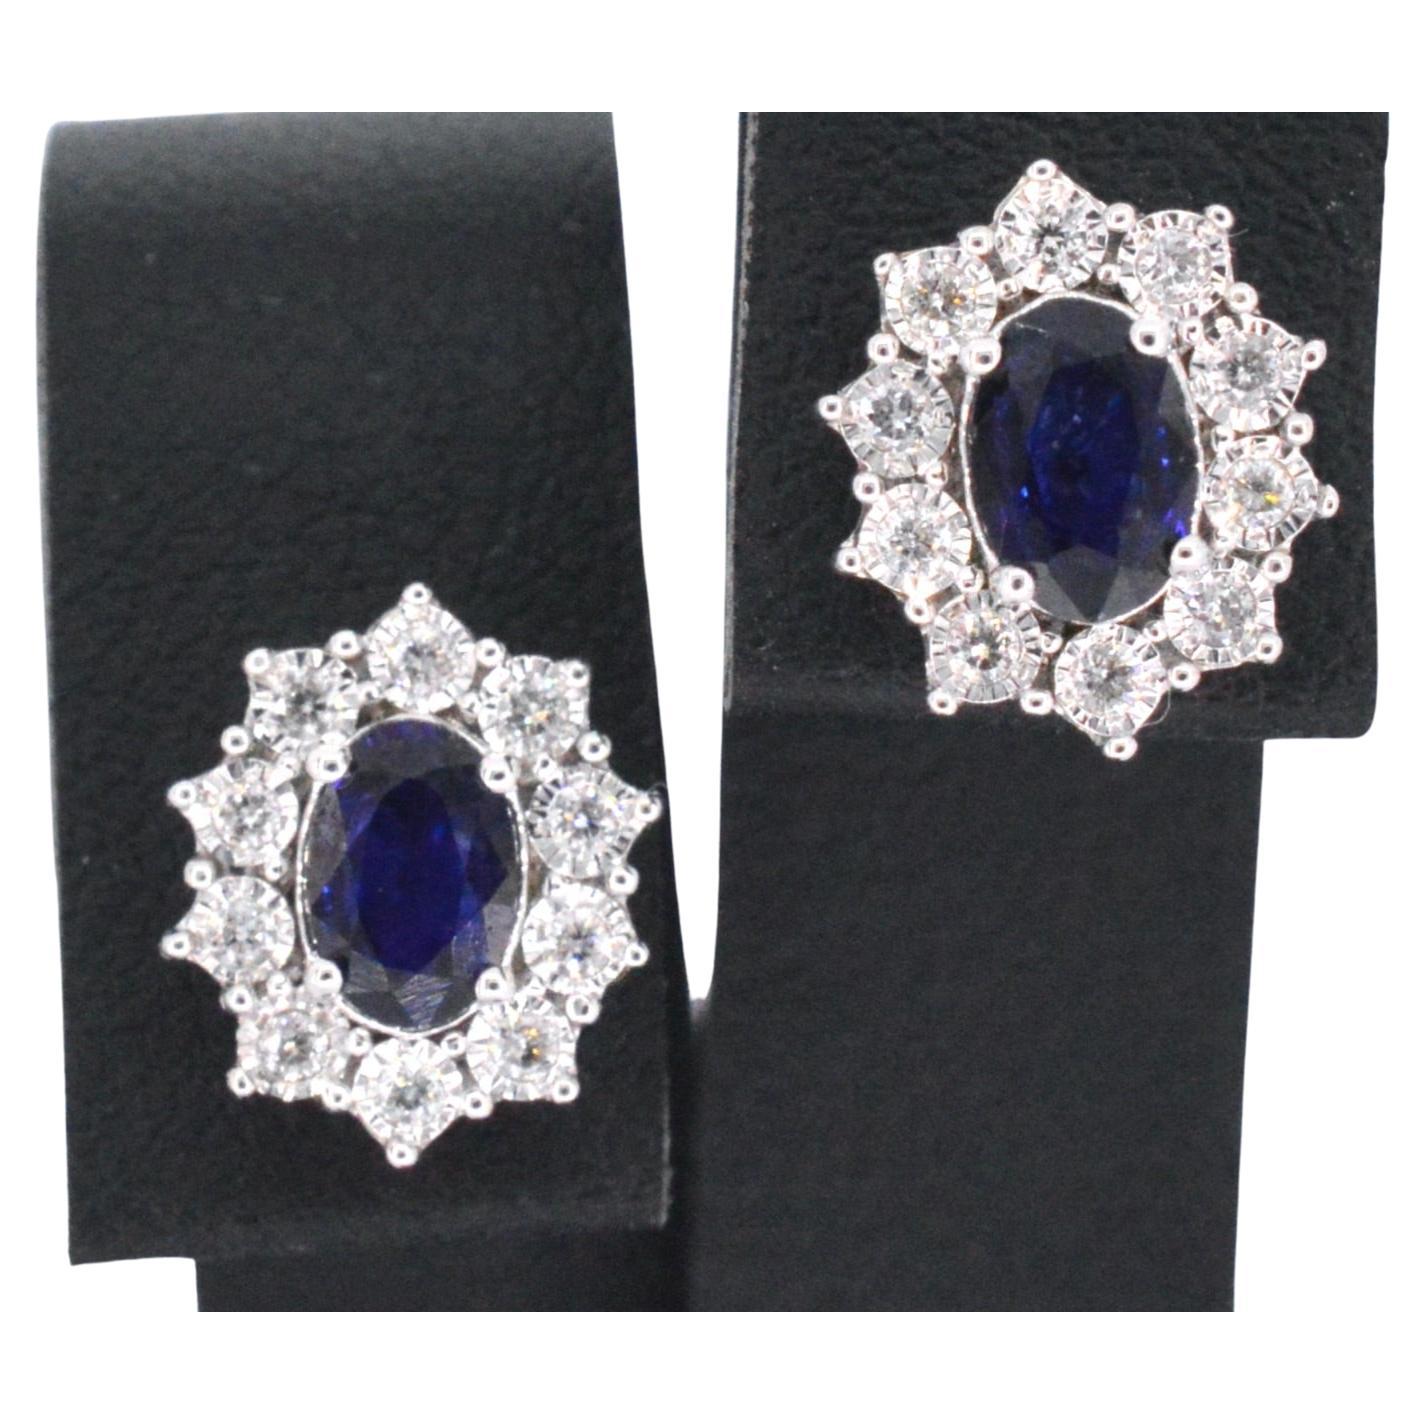 White Gold Earrings with Diamonds and Sapphire